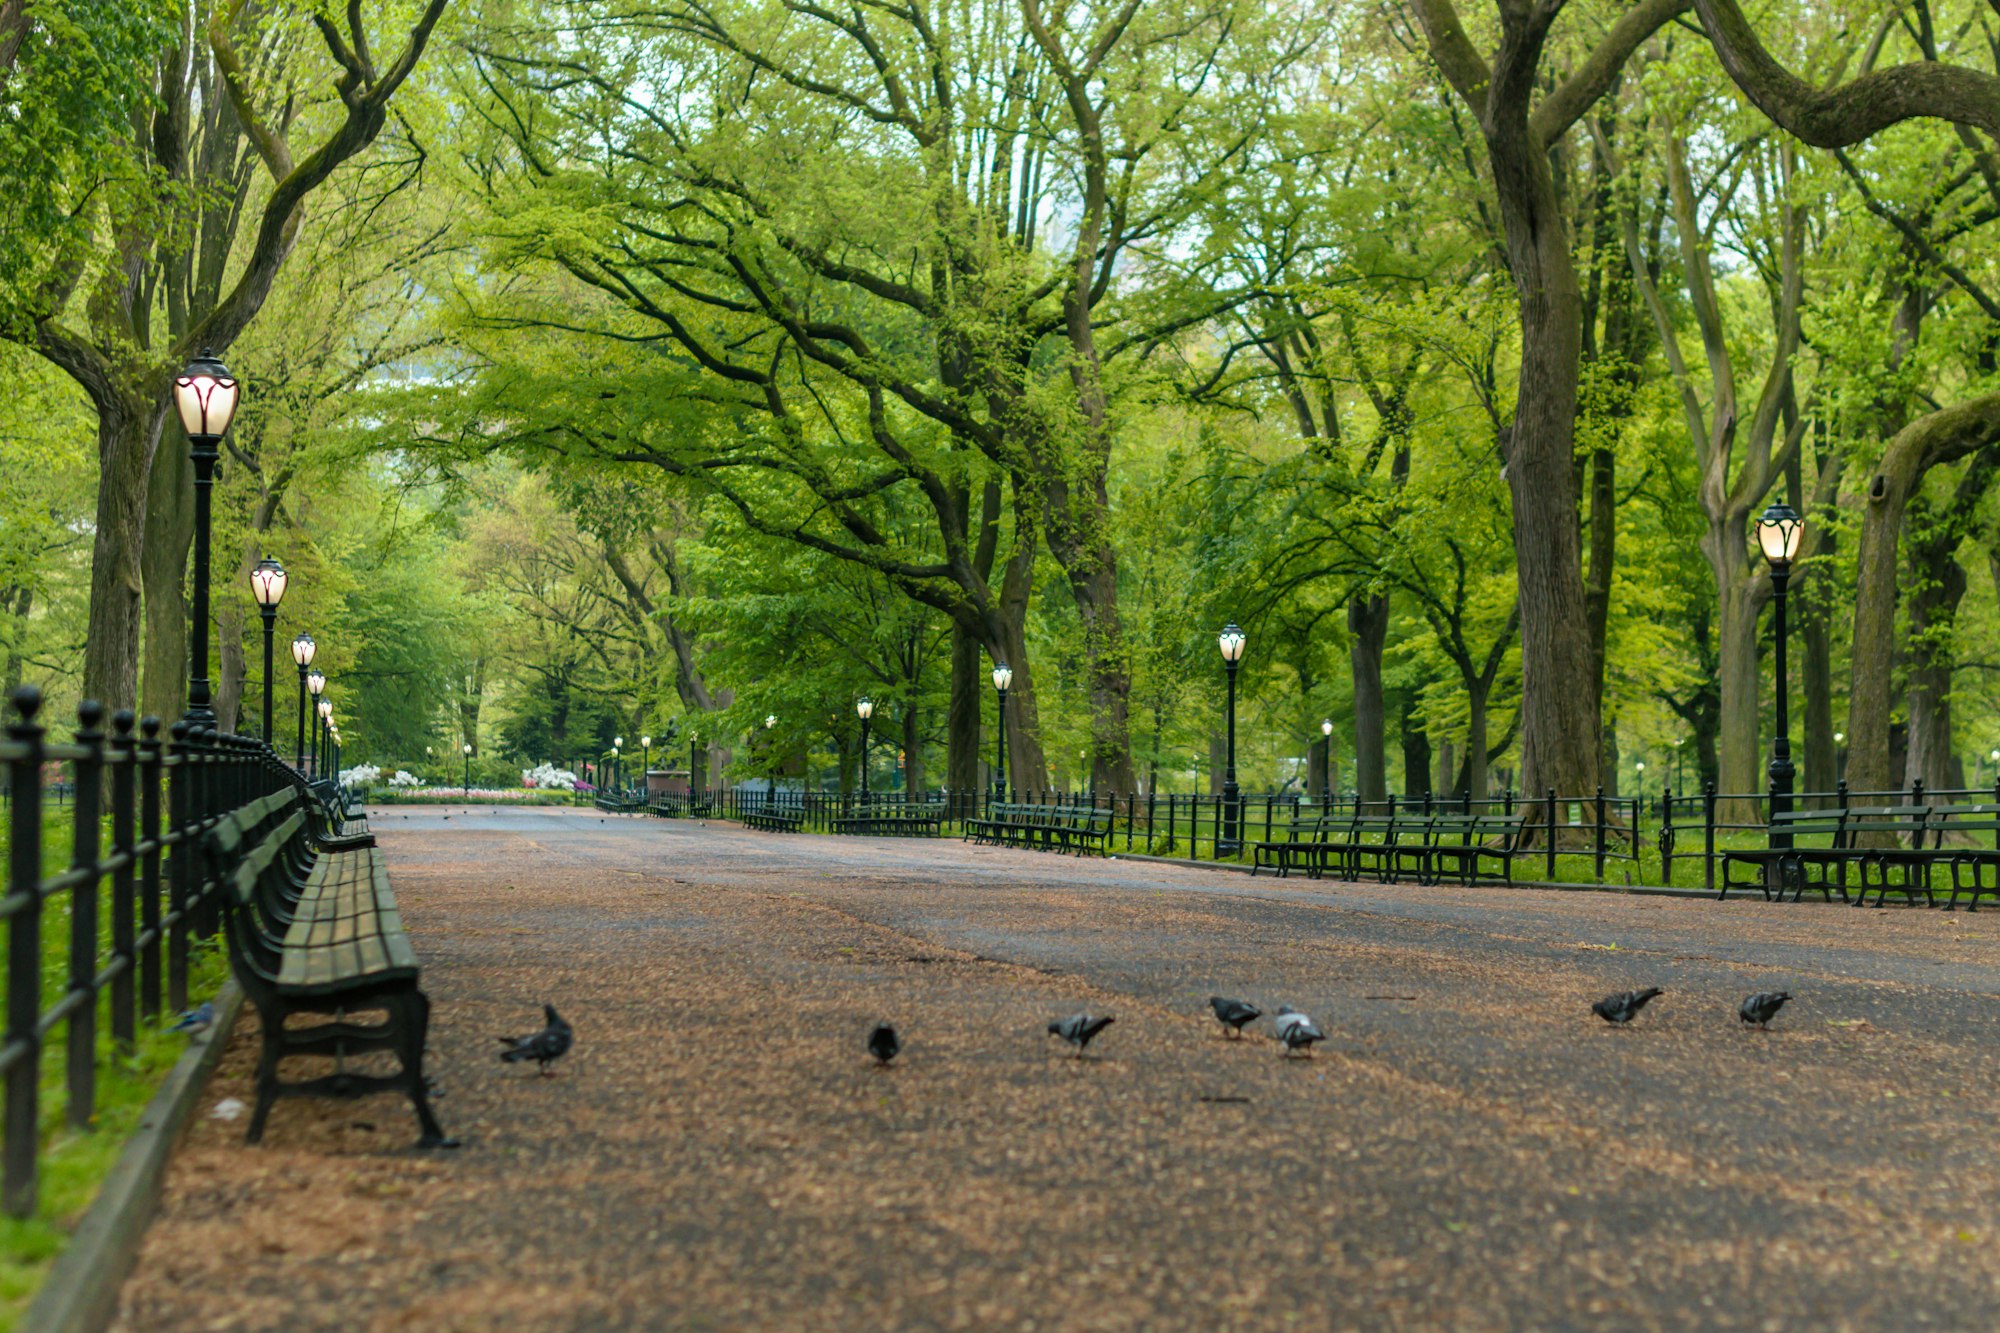 Central Park: A Green Oasis in the Concrete Jungle